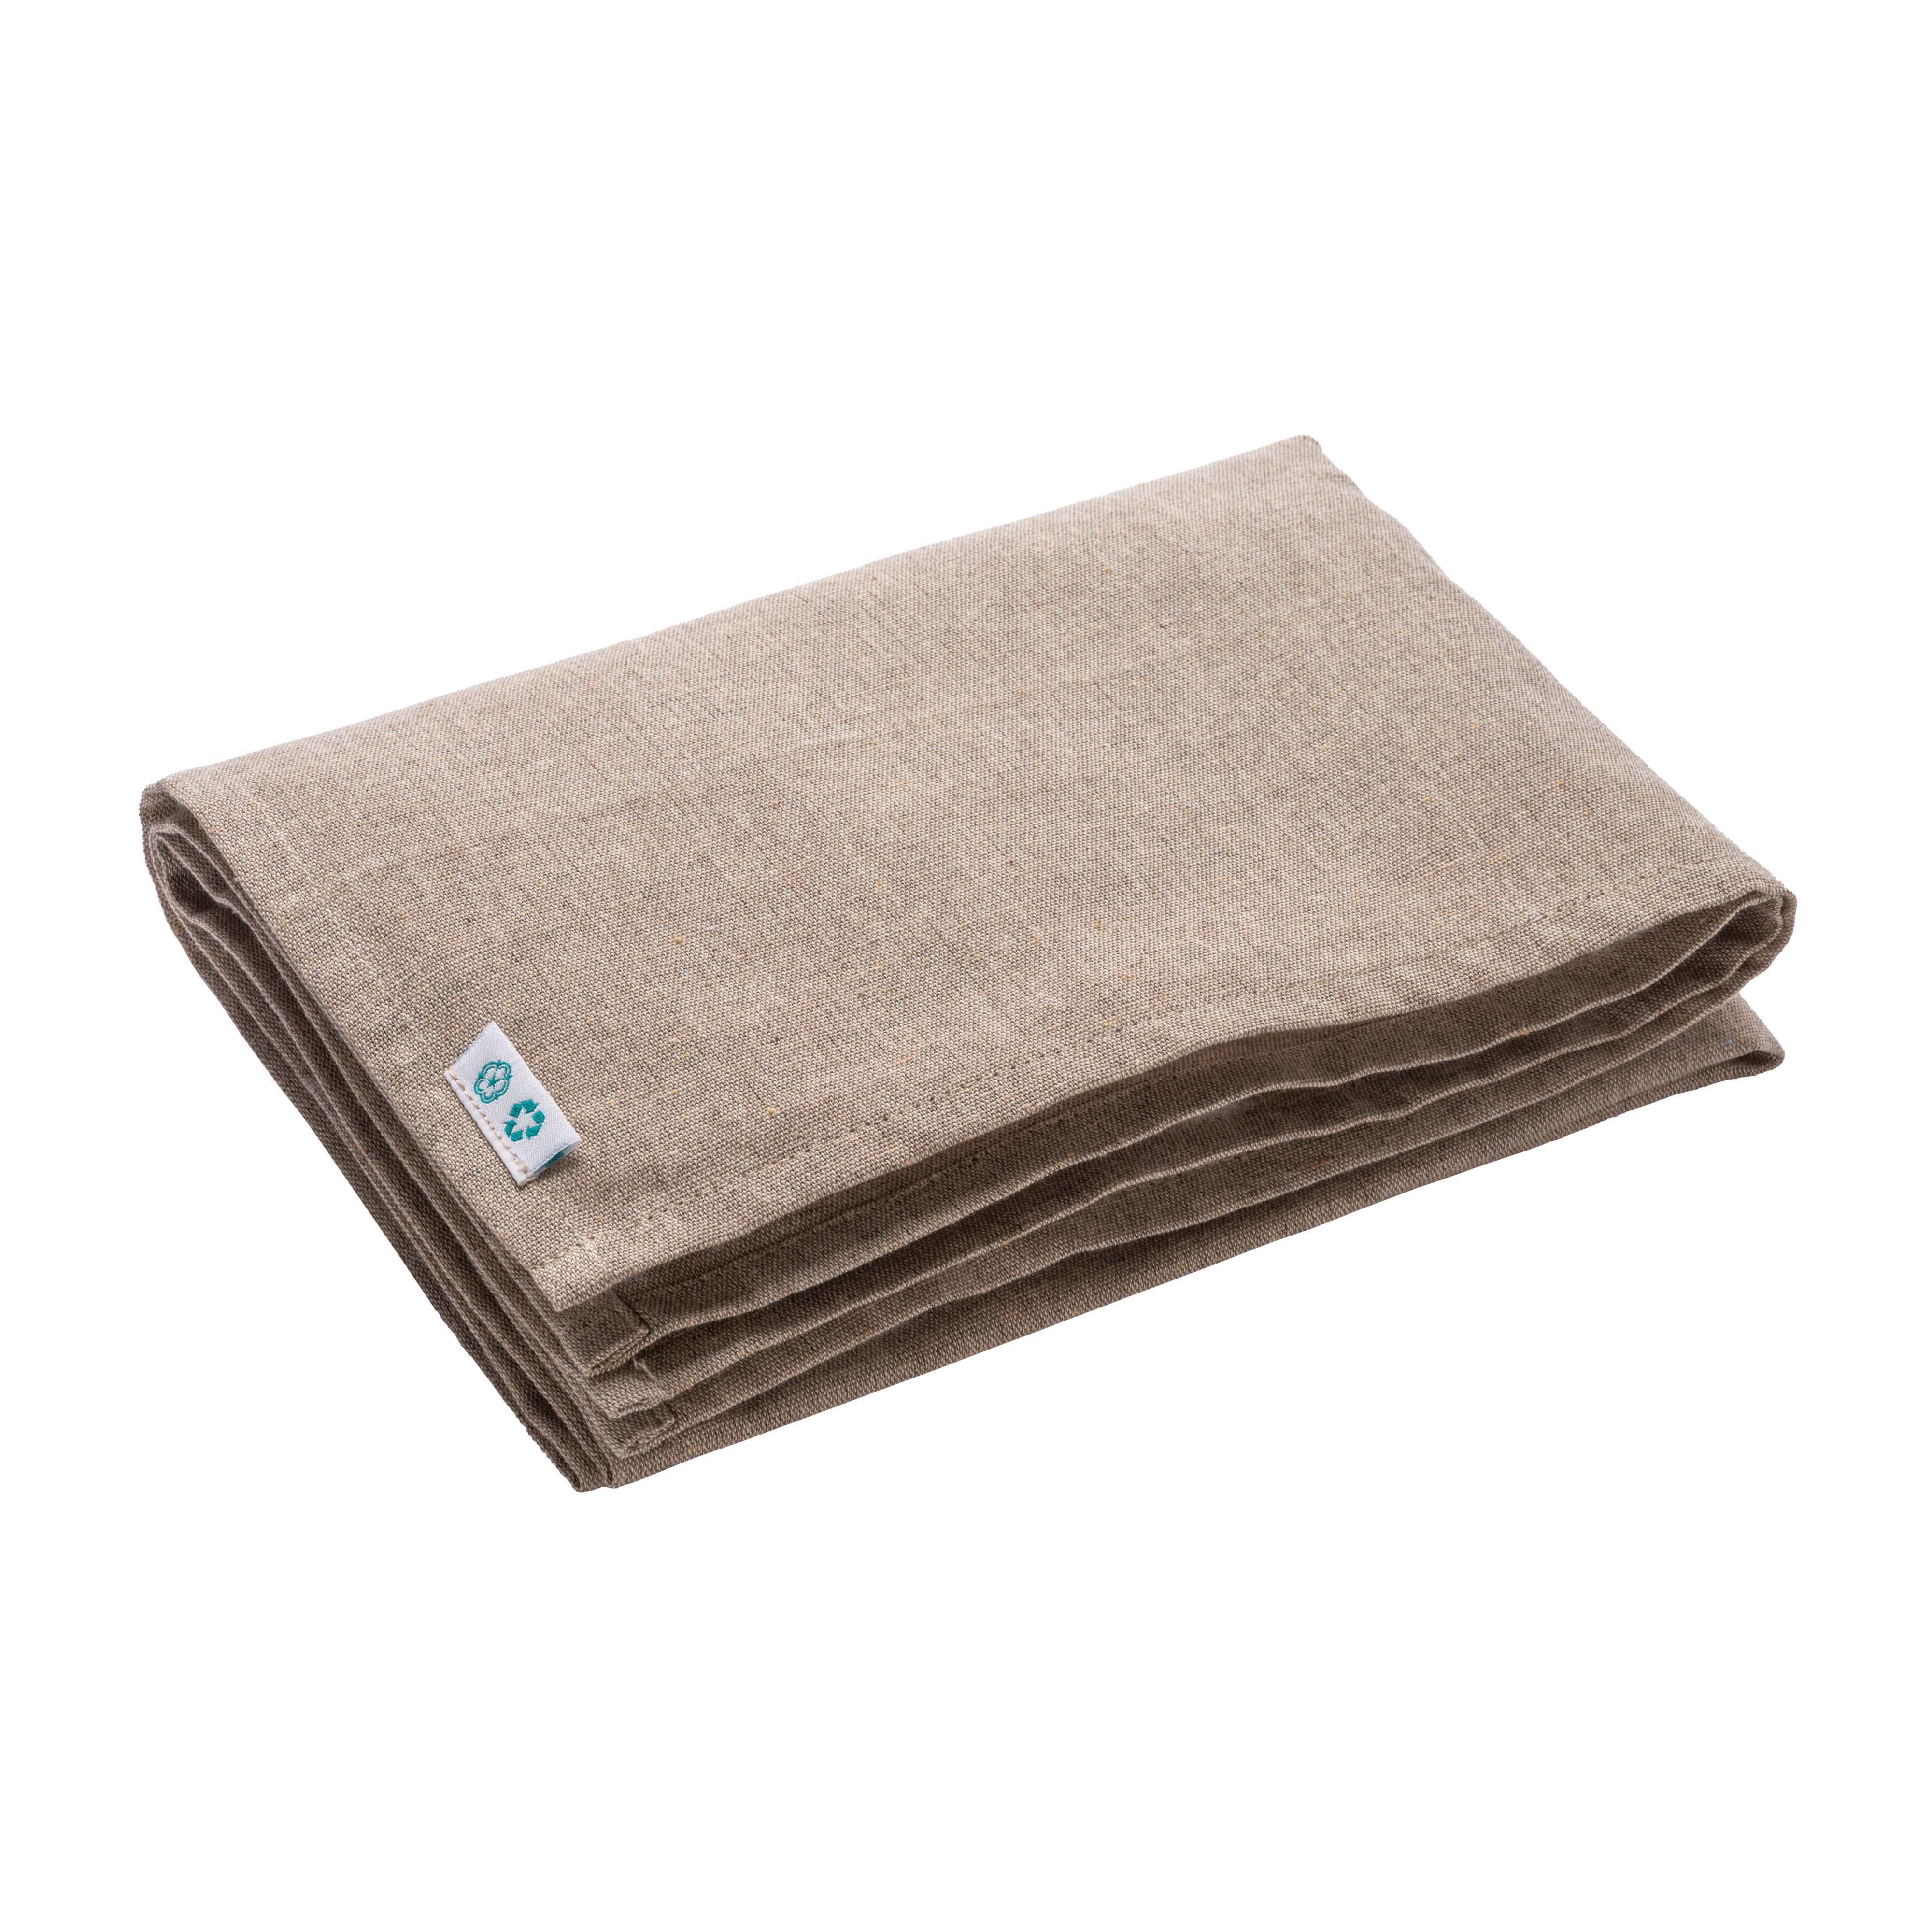 Eco Gifts Kitchen cloth